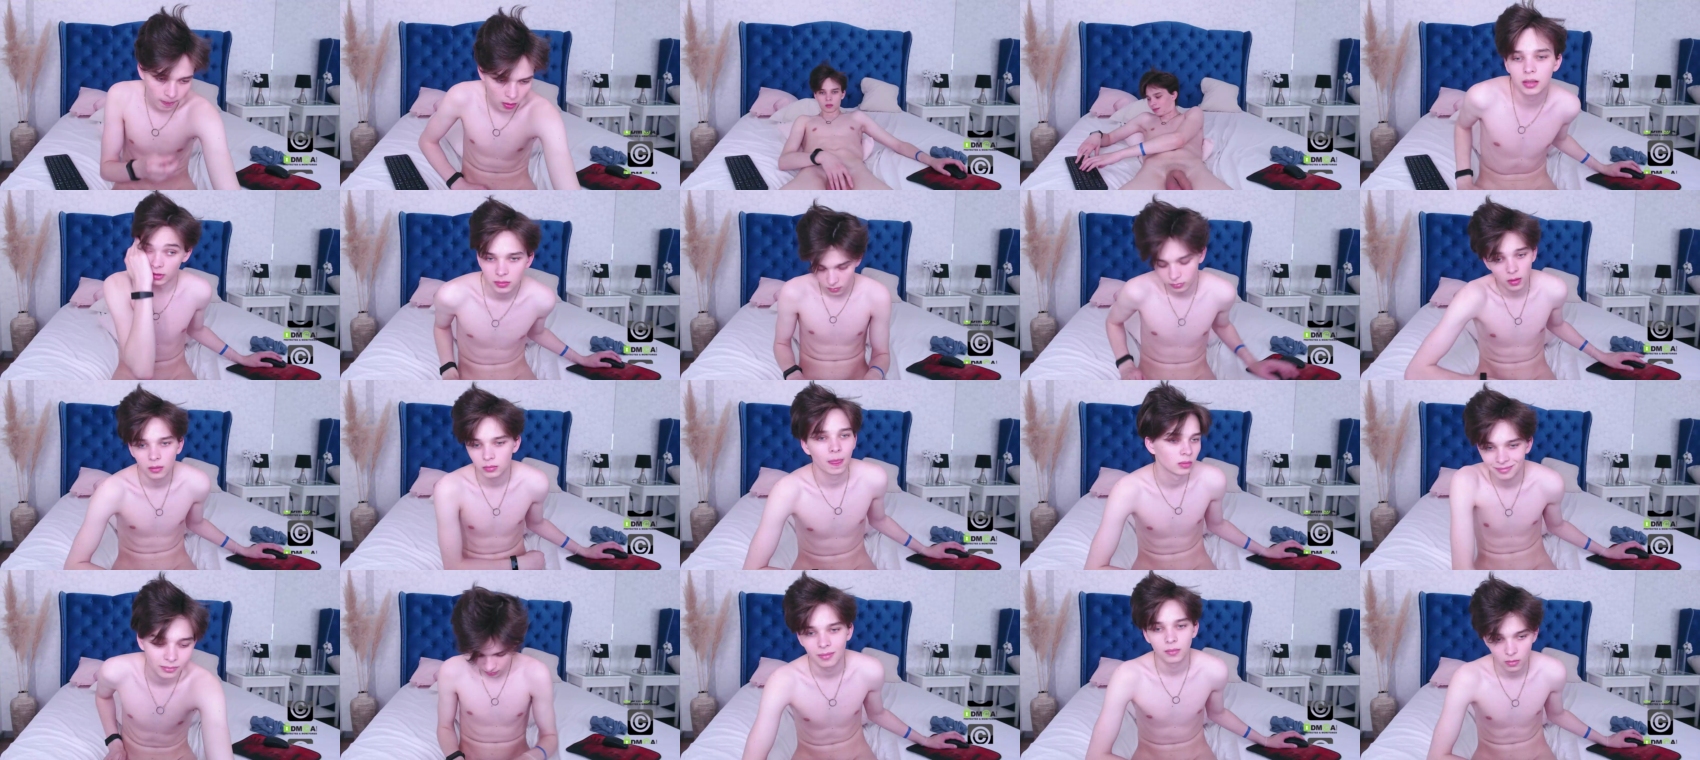 timmysawyer  16-06-2022 Males Nude